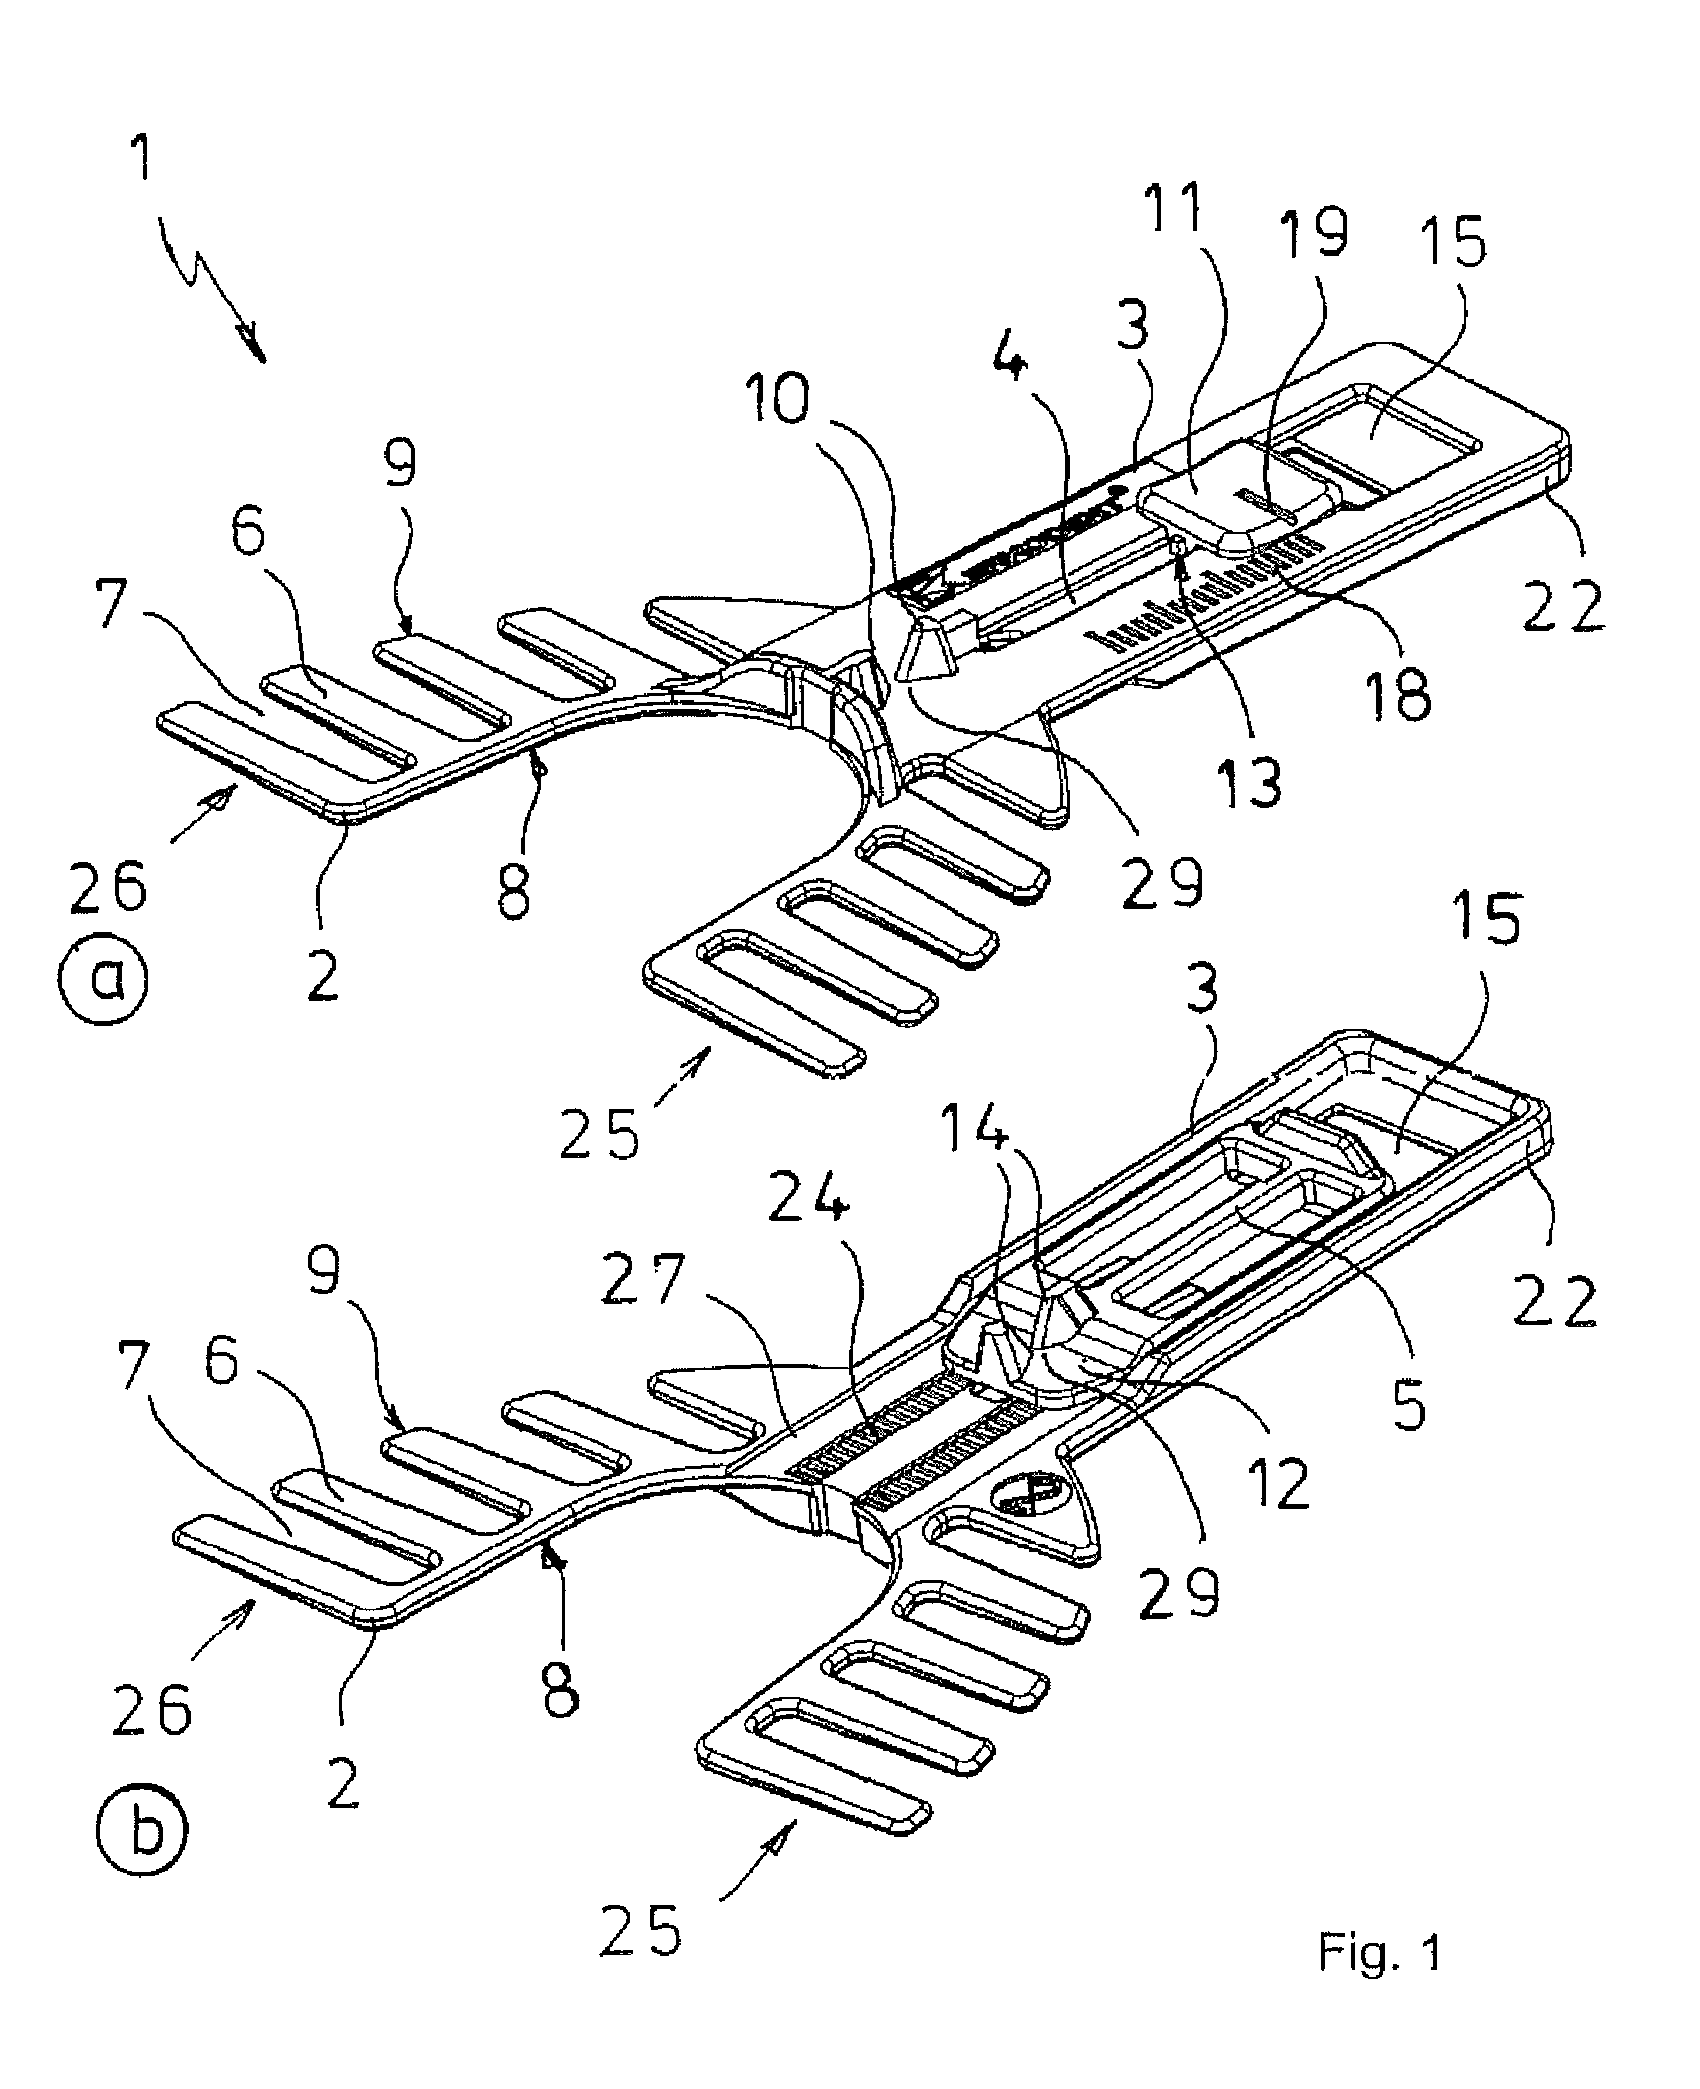 Device for the registration of the position of a protruding mandible